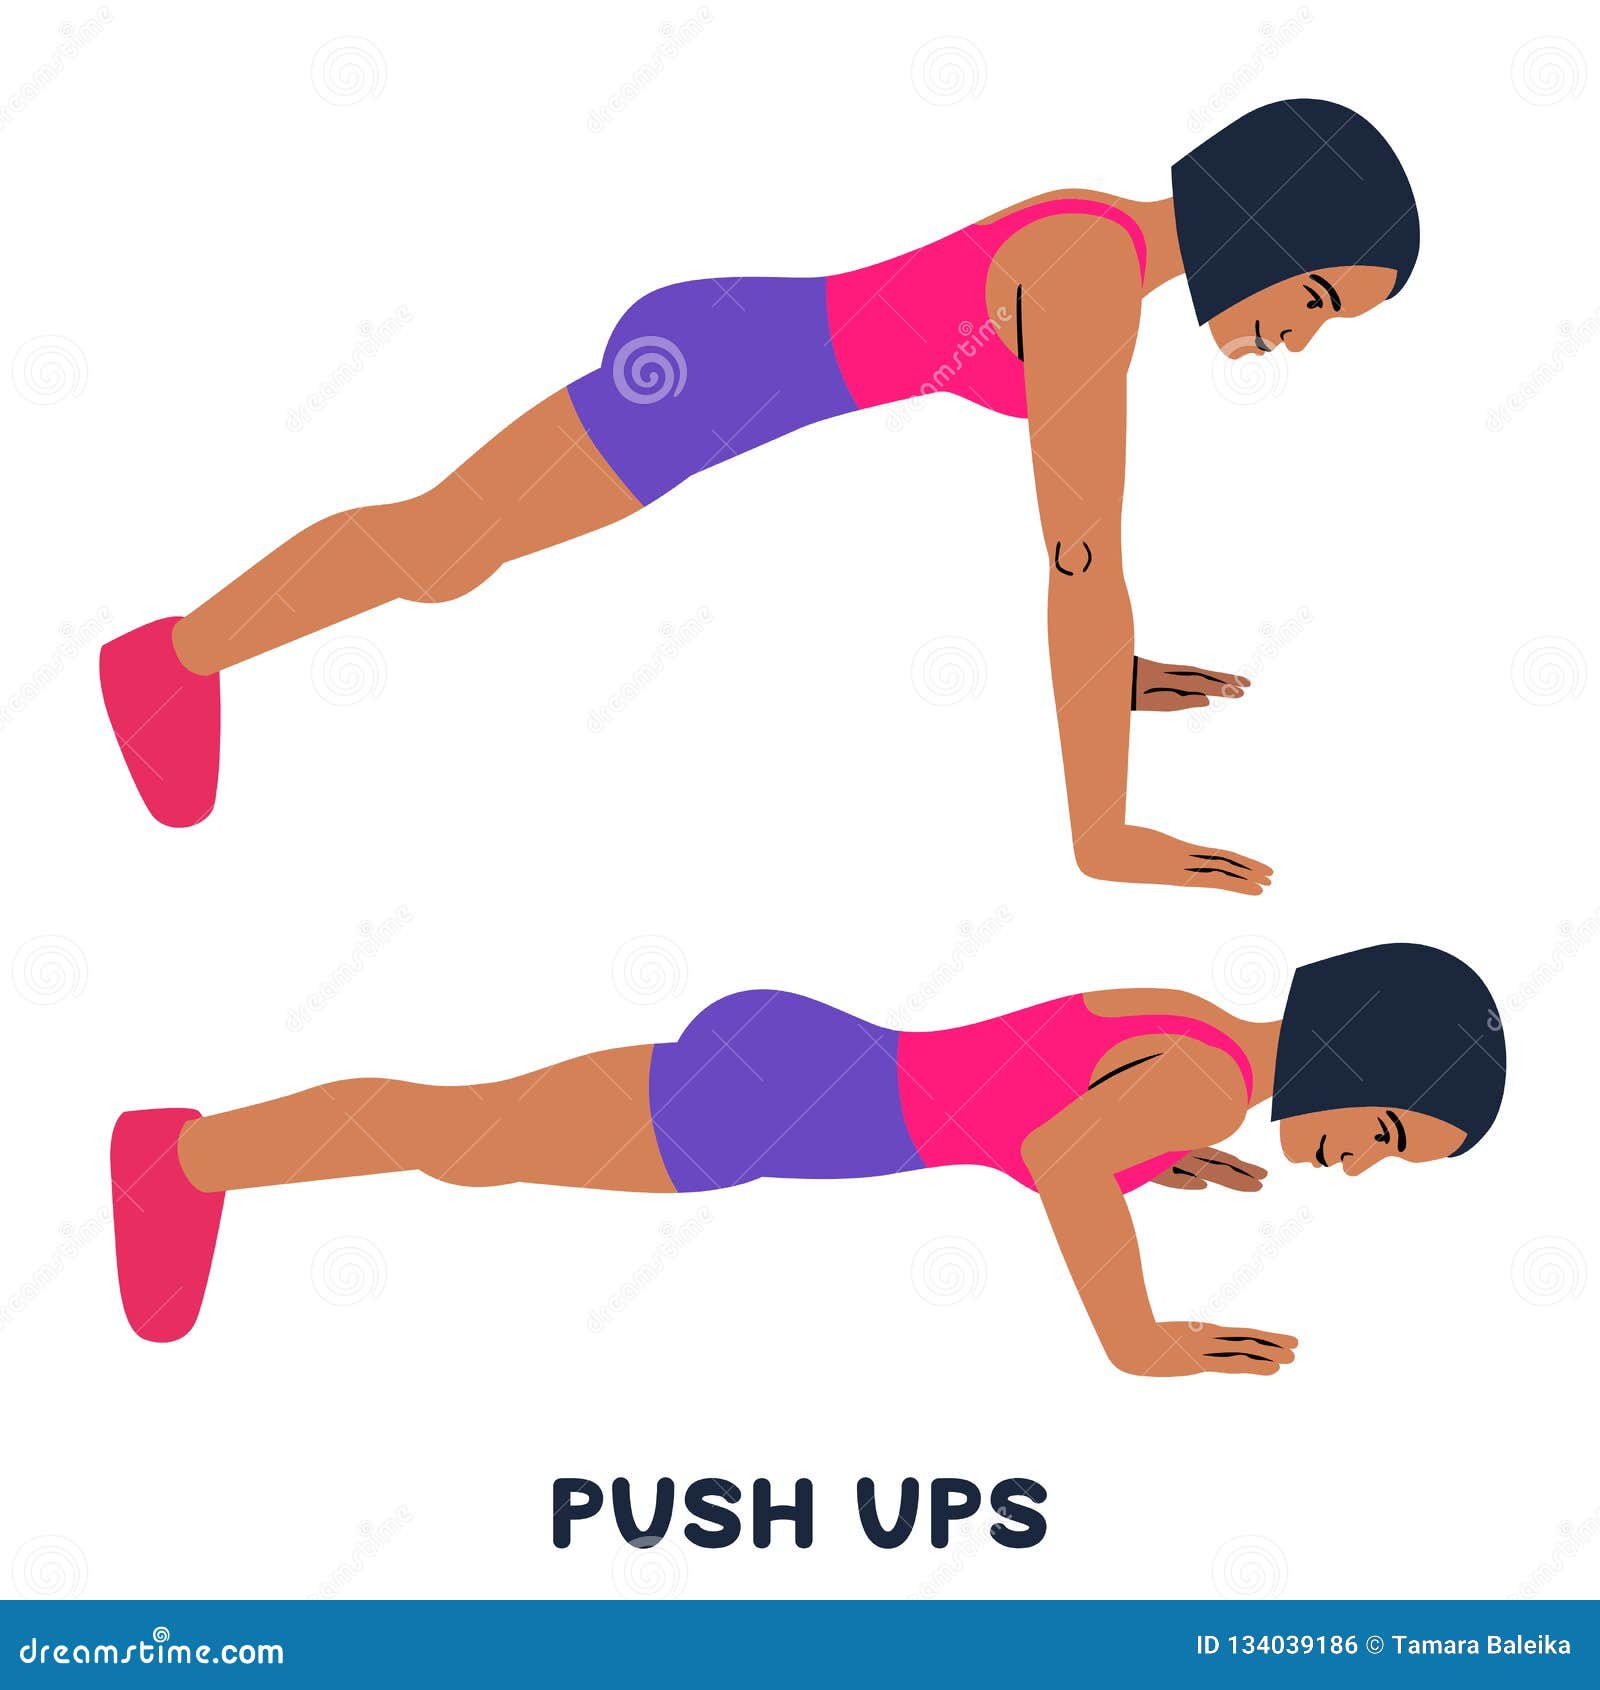 push ups. sport exersice. silhouettes of woman doing exercise. workout, training